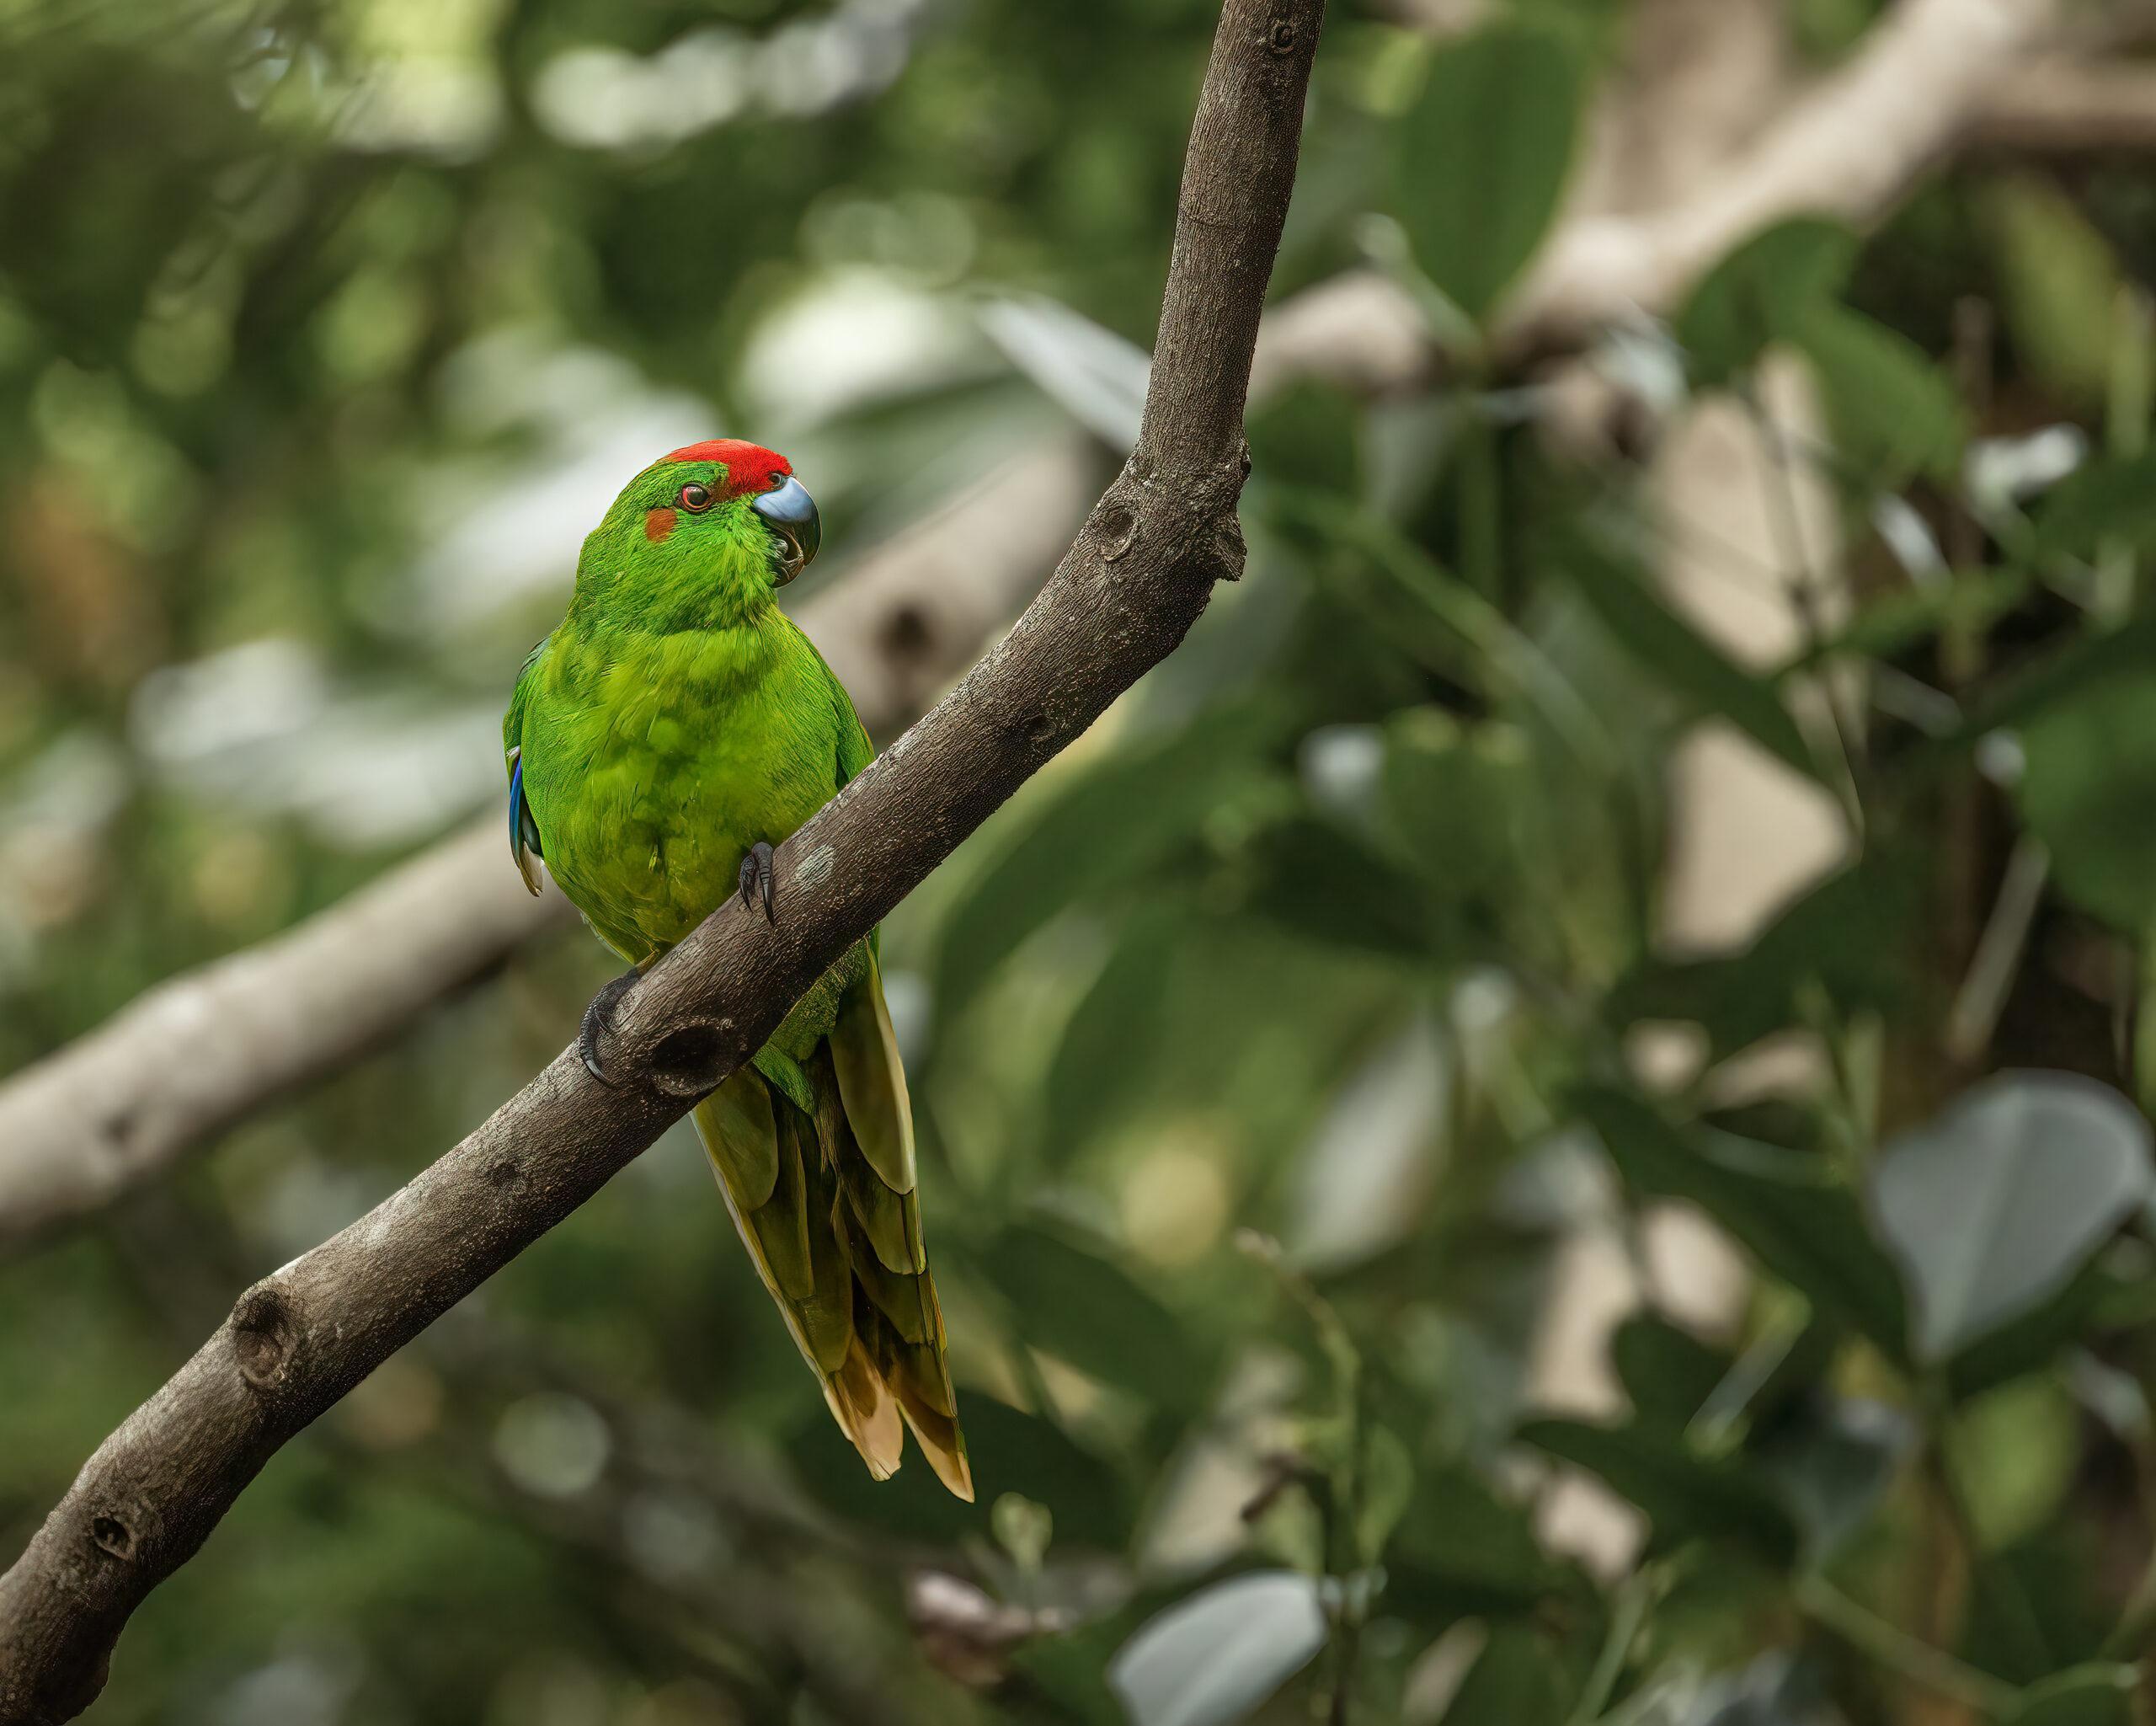 Norfolk Island green parrot perched on a branch in forest canopy.